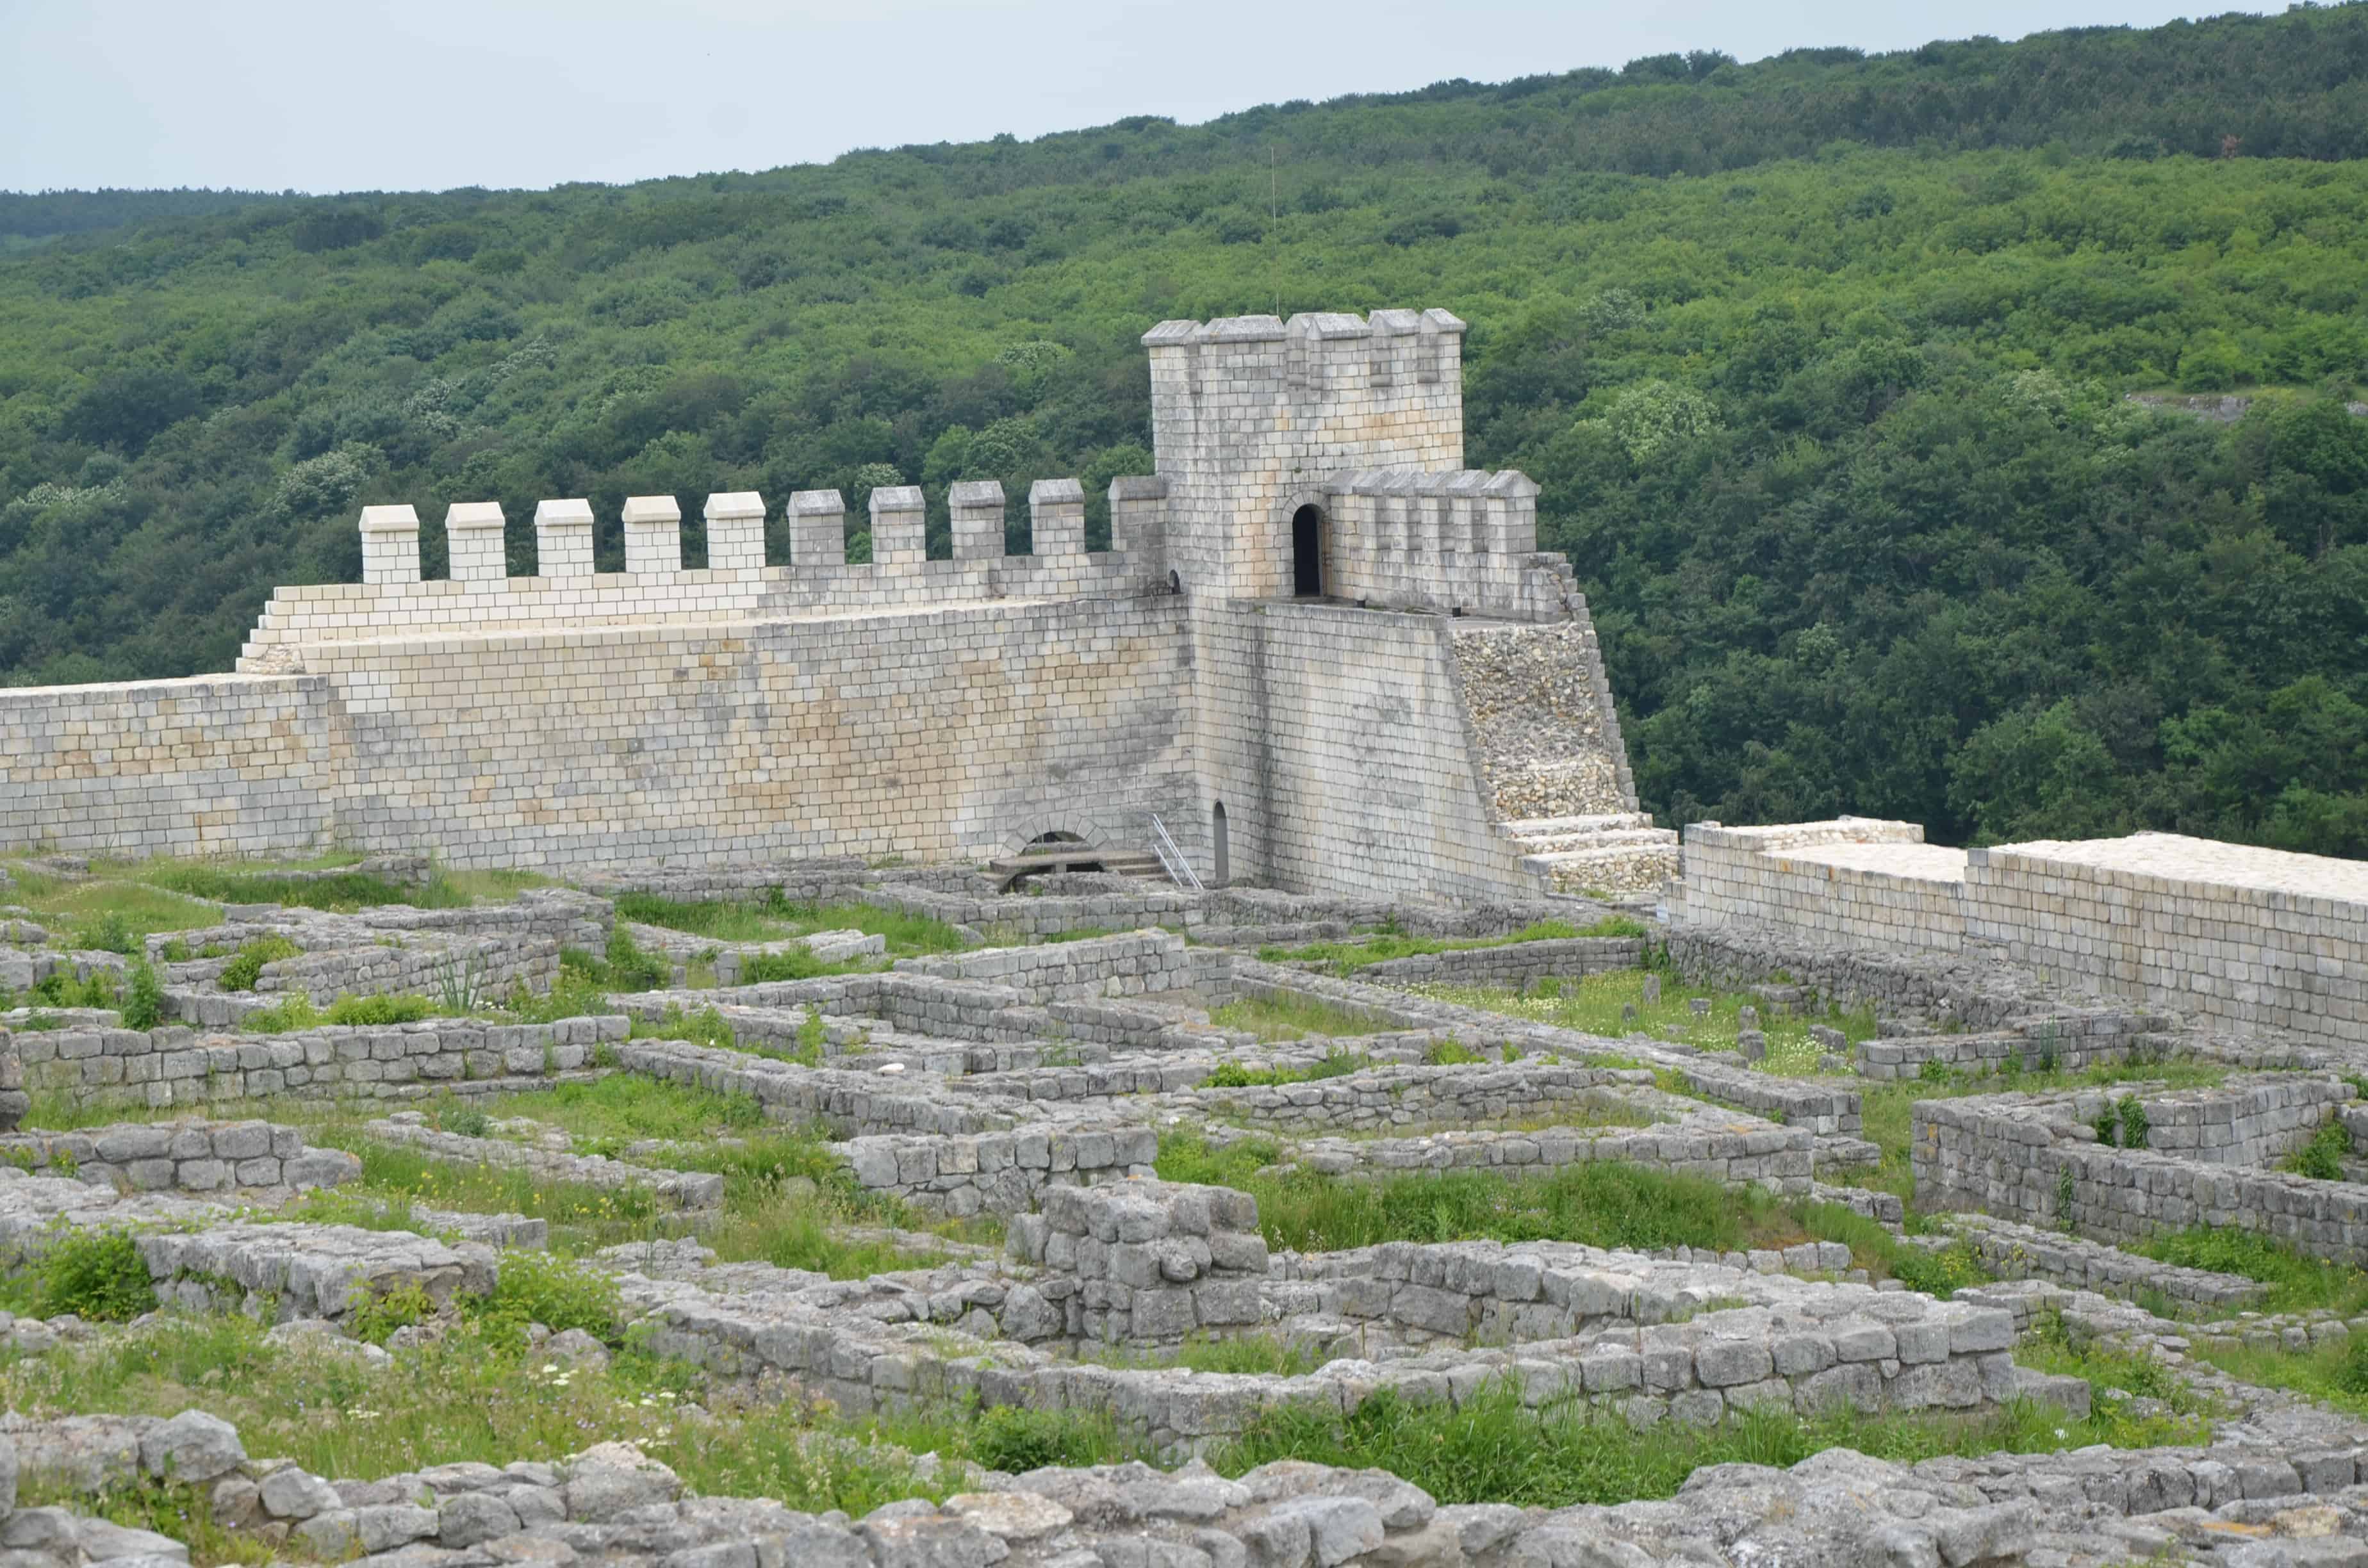 Reconstructed tower at Shumen Fortress in Bulgaria